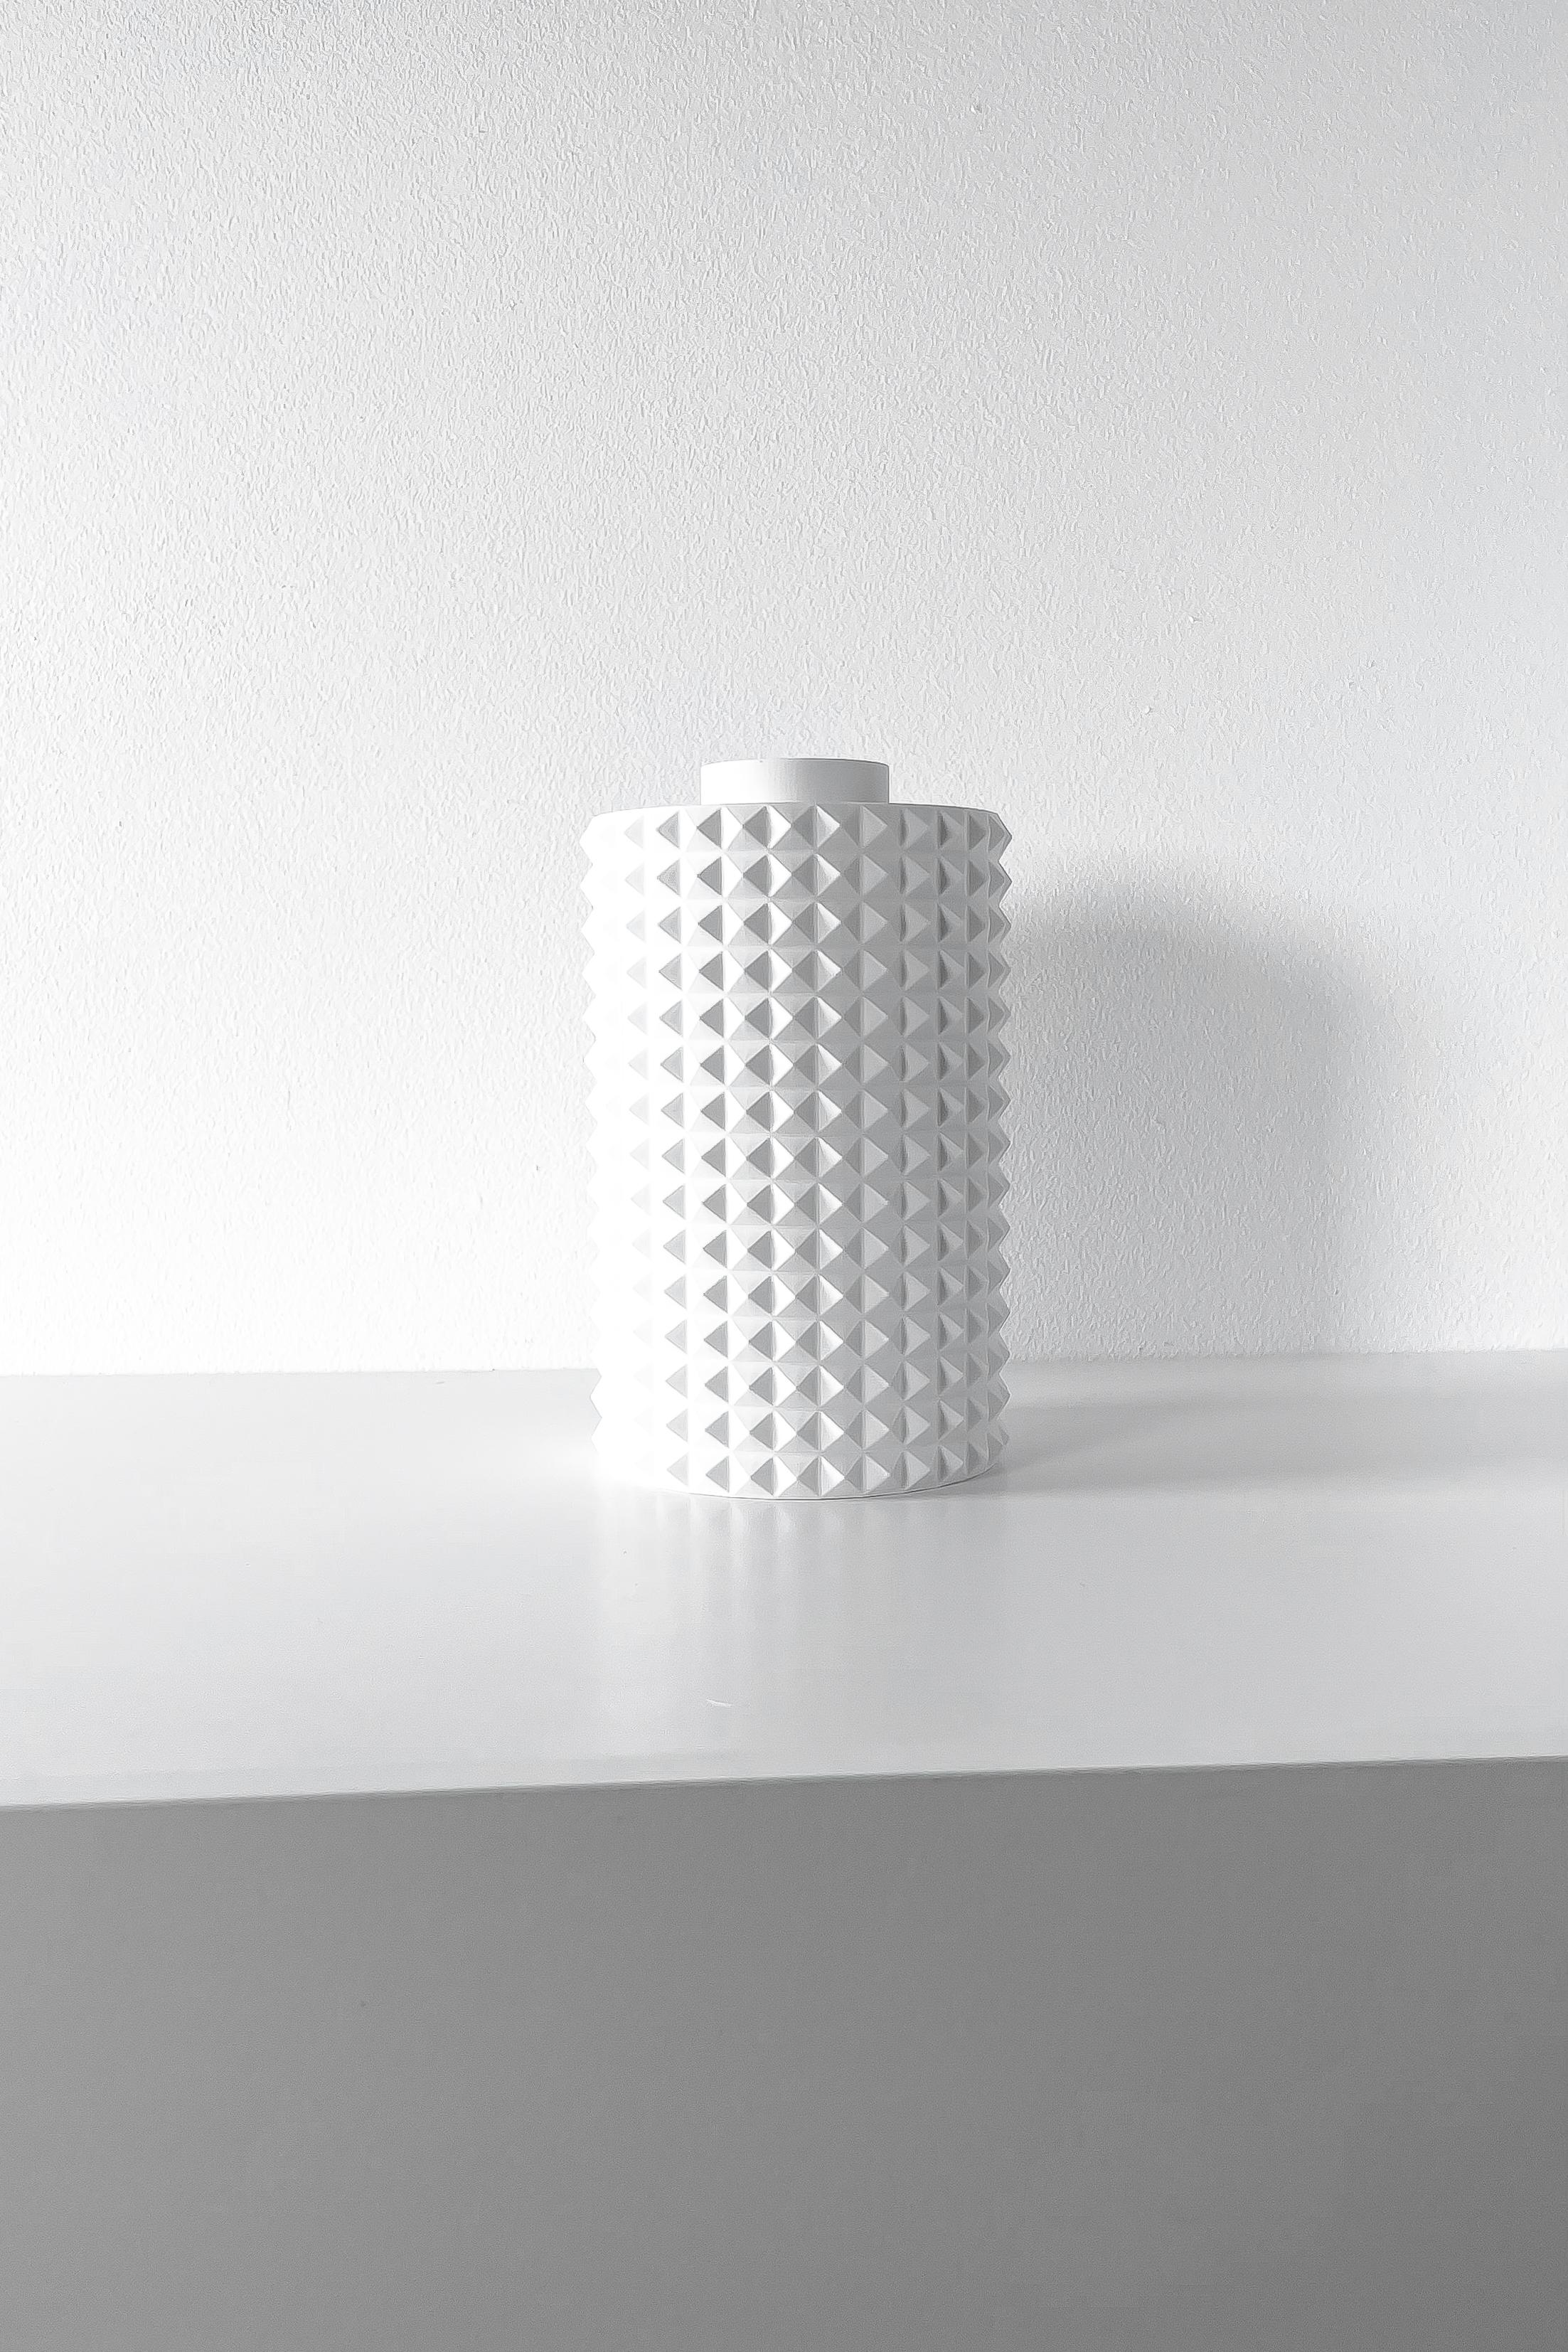 The Luvon Vase, Modern and Unique Home Decor for Dried and Flower Arrangements  | STL File 3d model